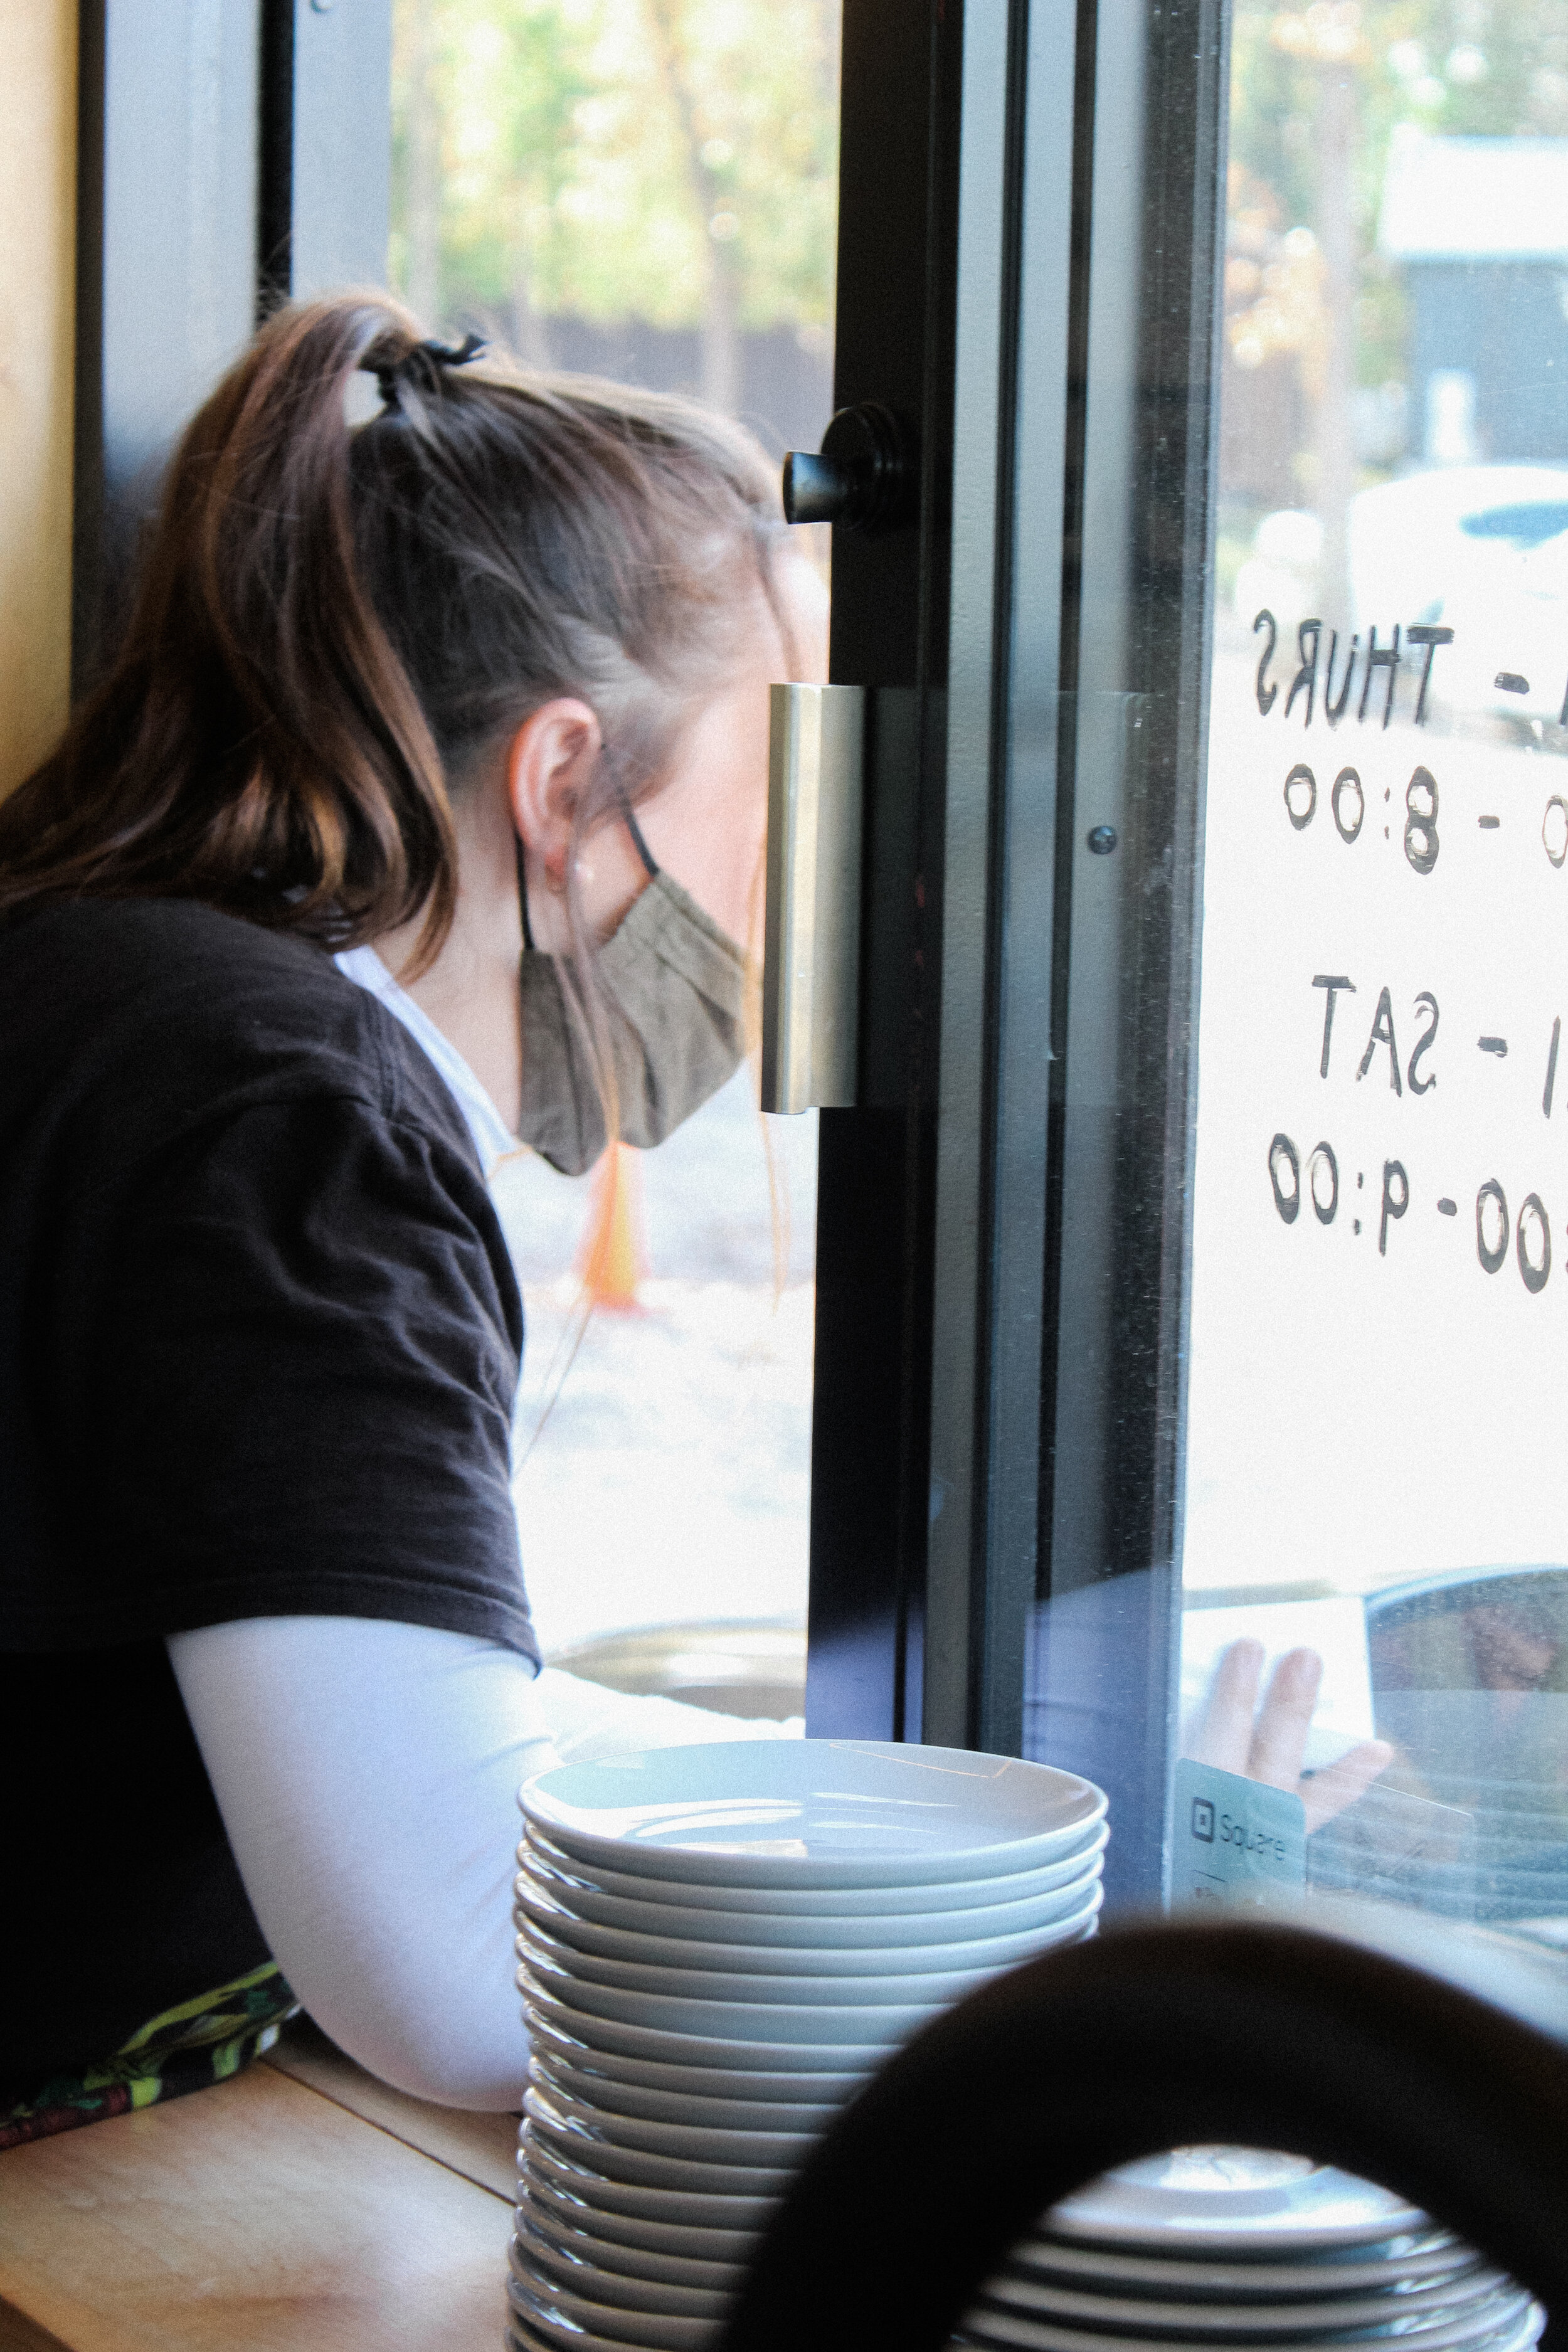 Along with the rush of making drinks for customers indoors, baristas at Scandi Tiny must also take orders in the drive-thru. Here, we see barista Julie Gromer taking a drive thru order.